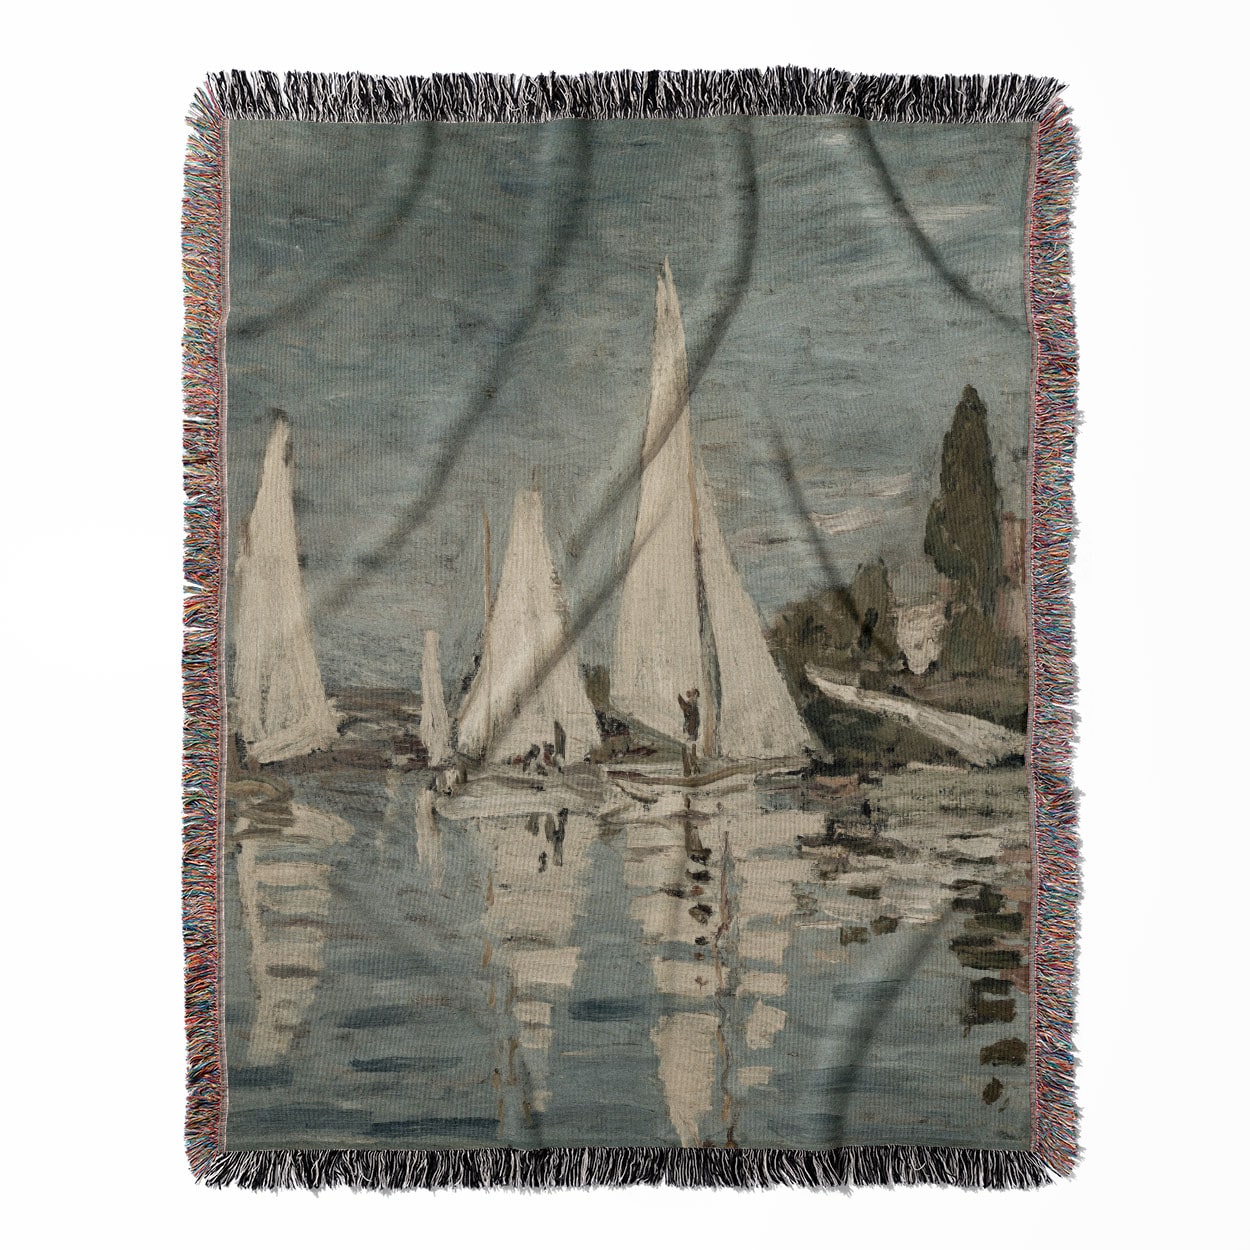 Nautical woven throw blanket, made with 100% cotton, providing a soft and cozy texture with sailboats for home decor.